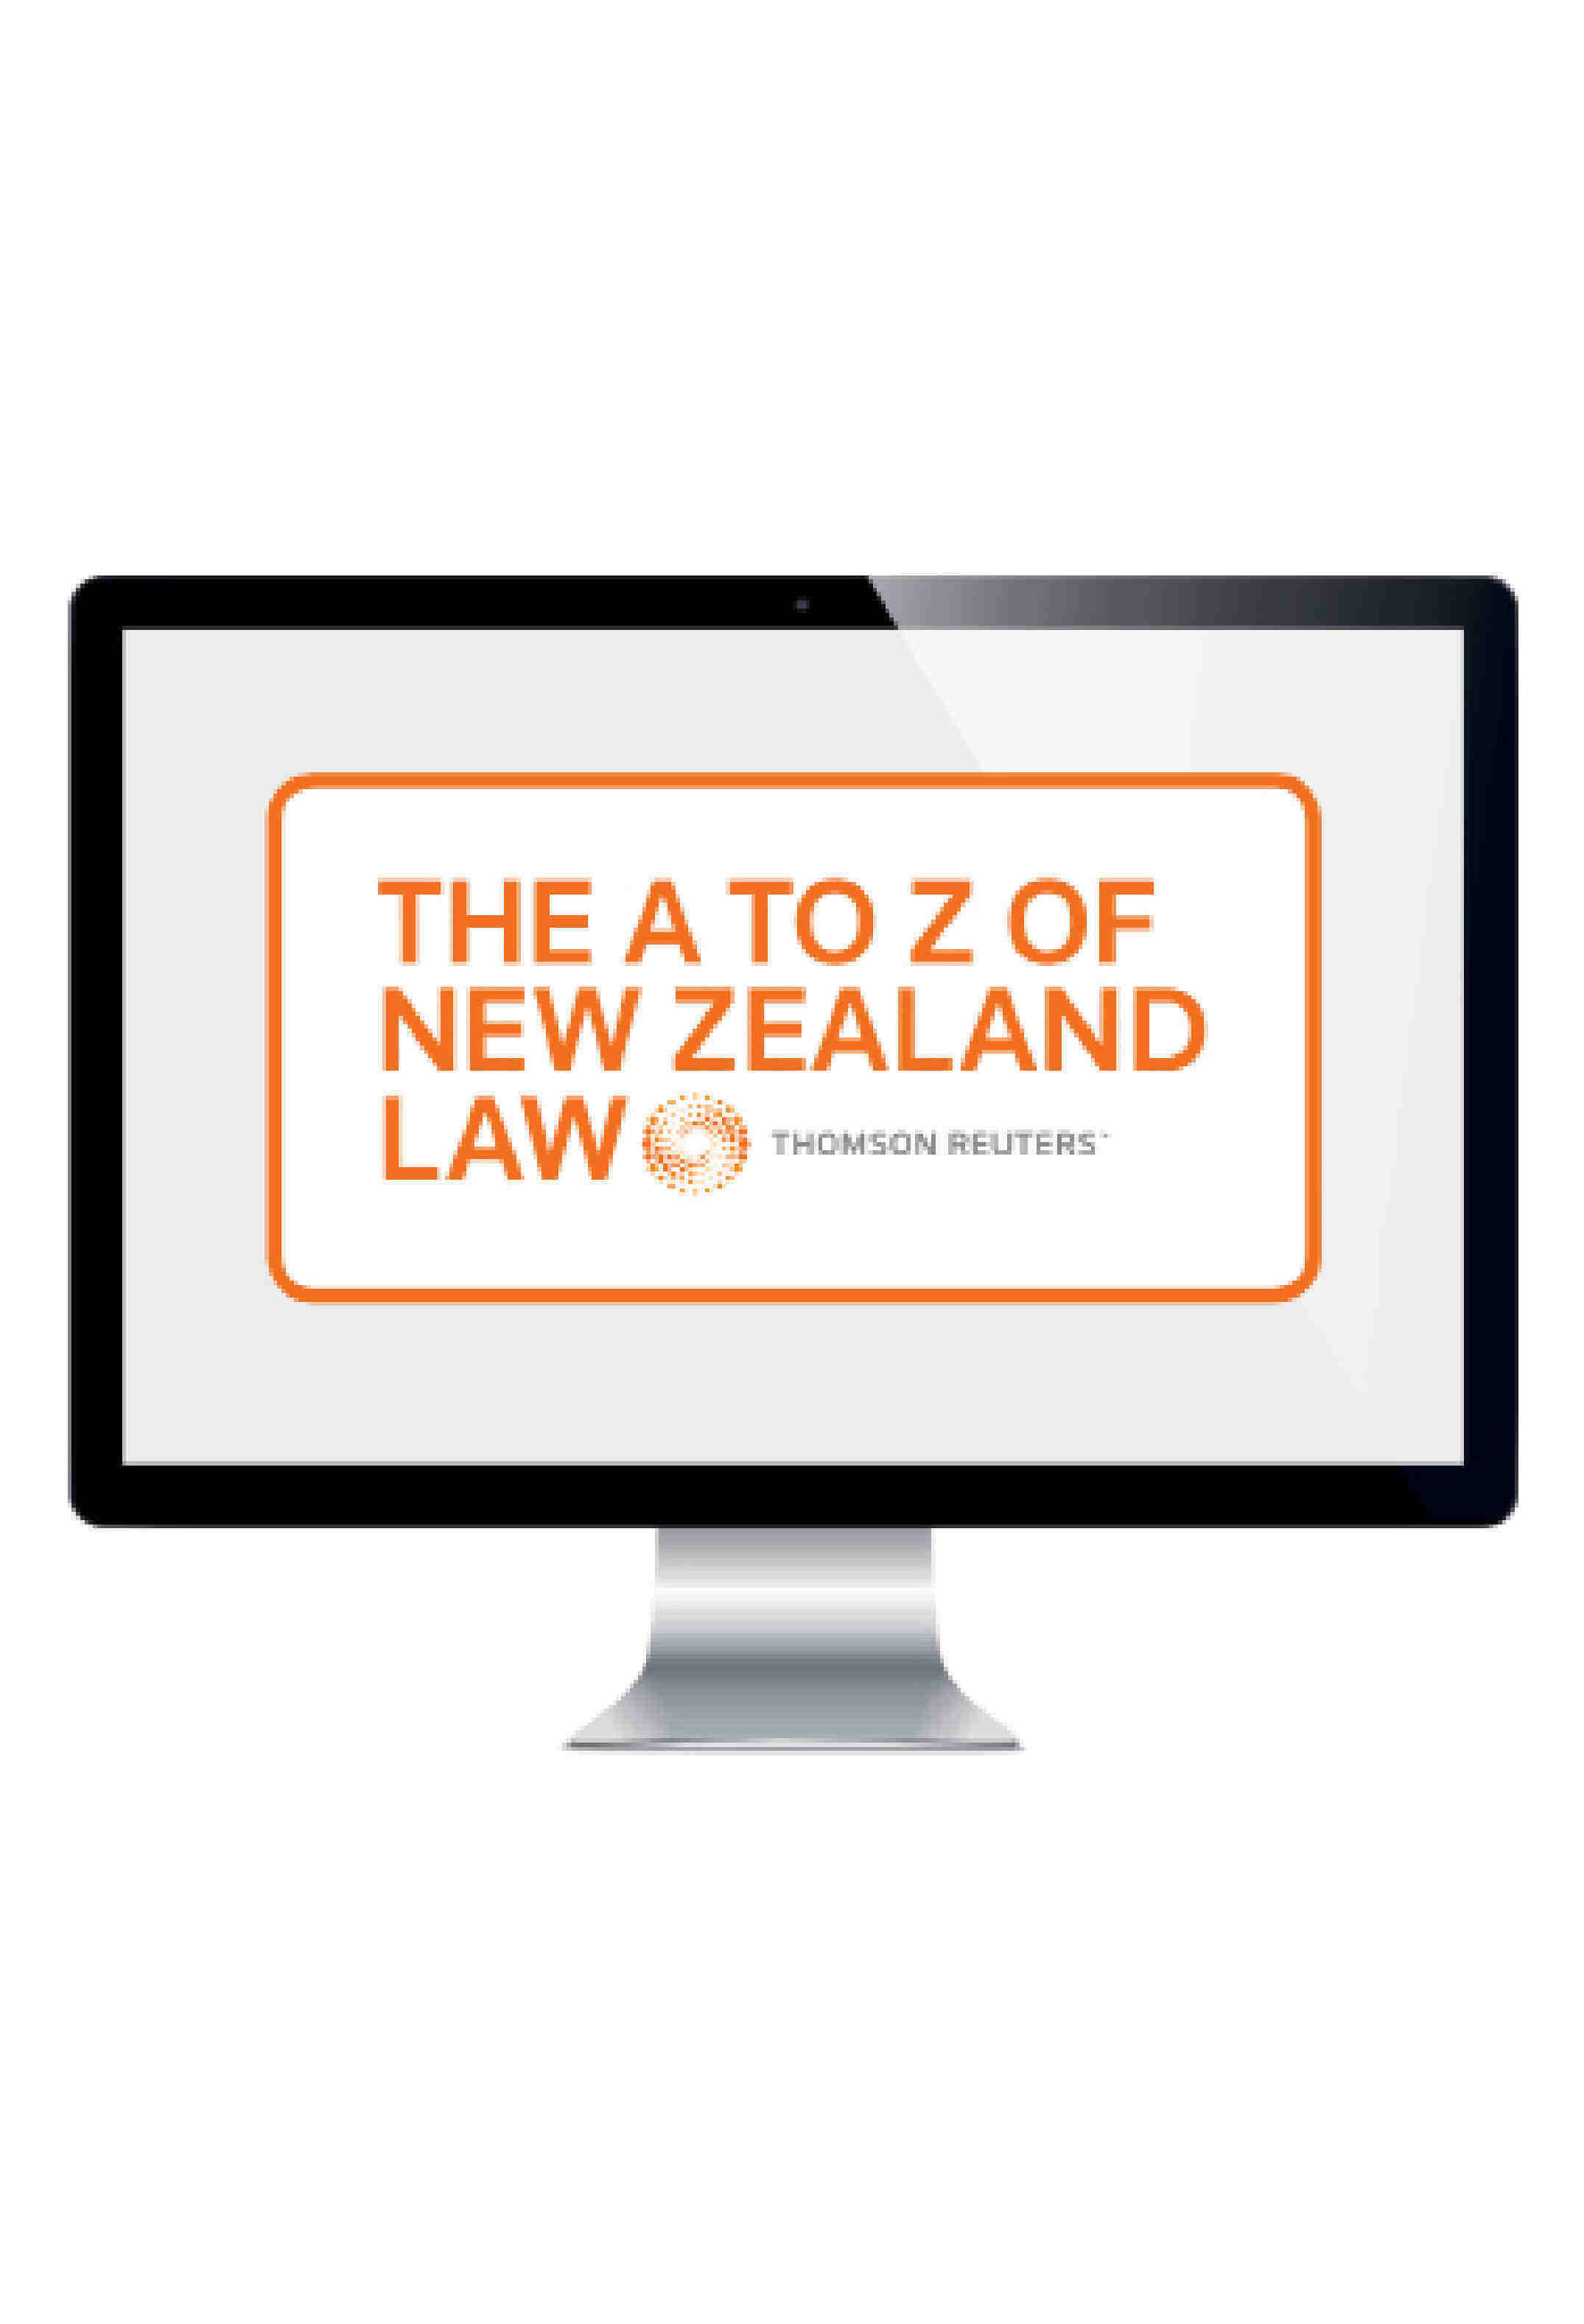 A to Z of NZ Law - Criminal Law, Youth Justice - Westlaw NZ